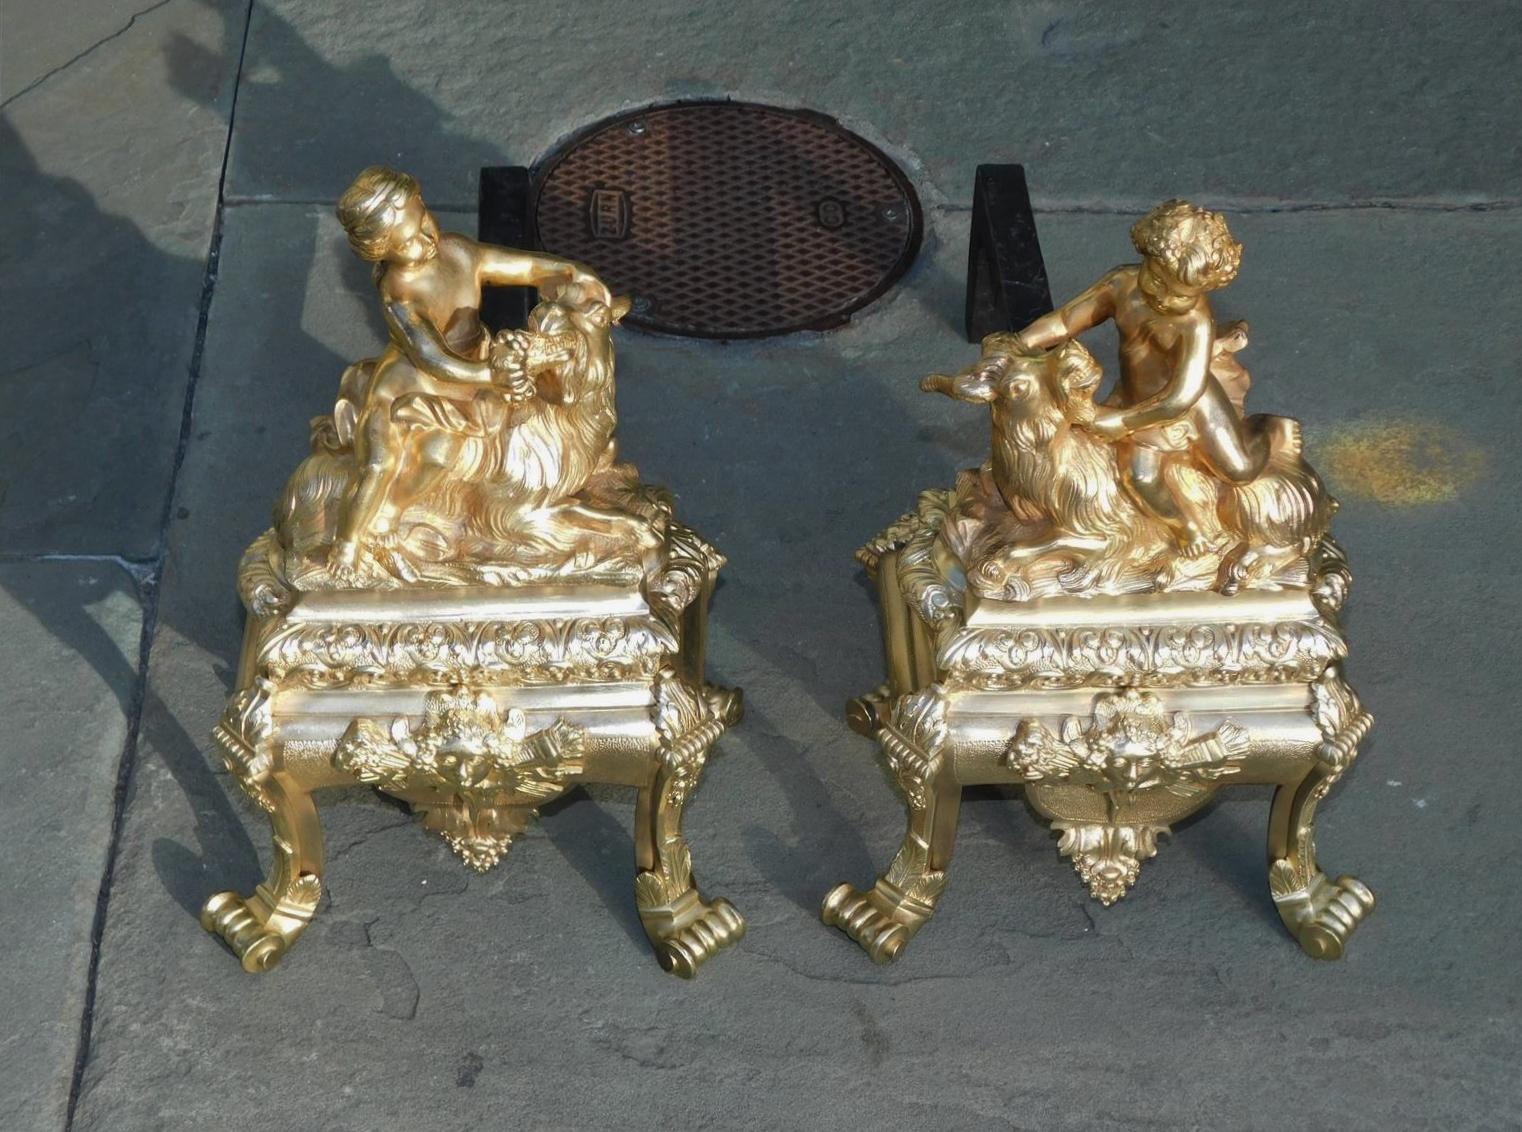 Hammered Pair of French Regency Gilt Bronze Figural Child & Goat Masked Andirons, C. 1725